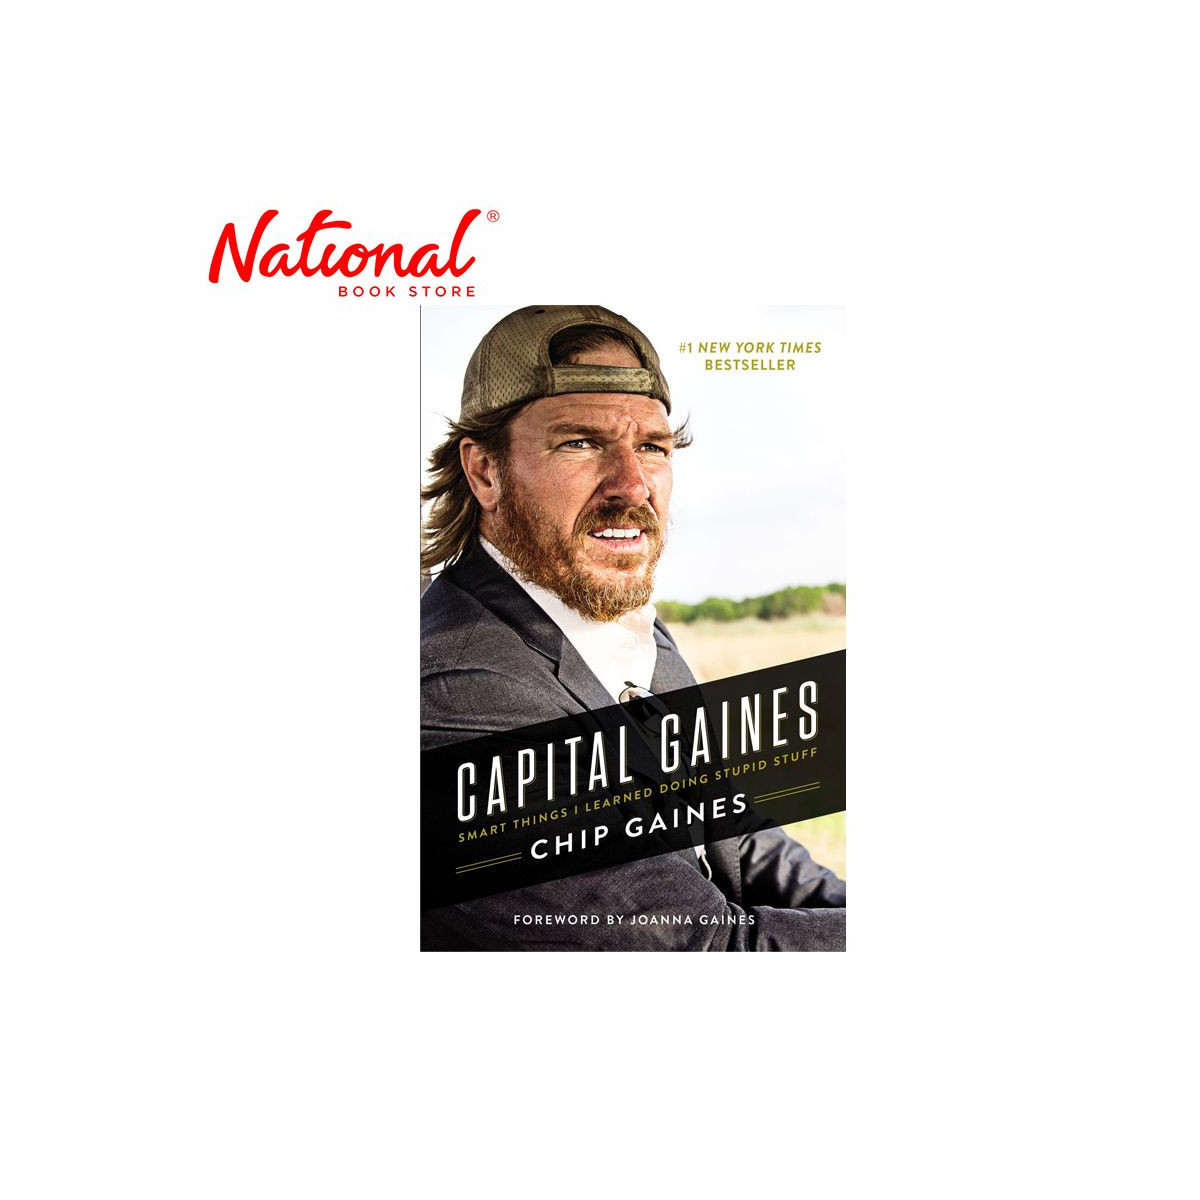 Capital Gaines Hardcover by Chip Gaines - Business Book